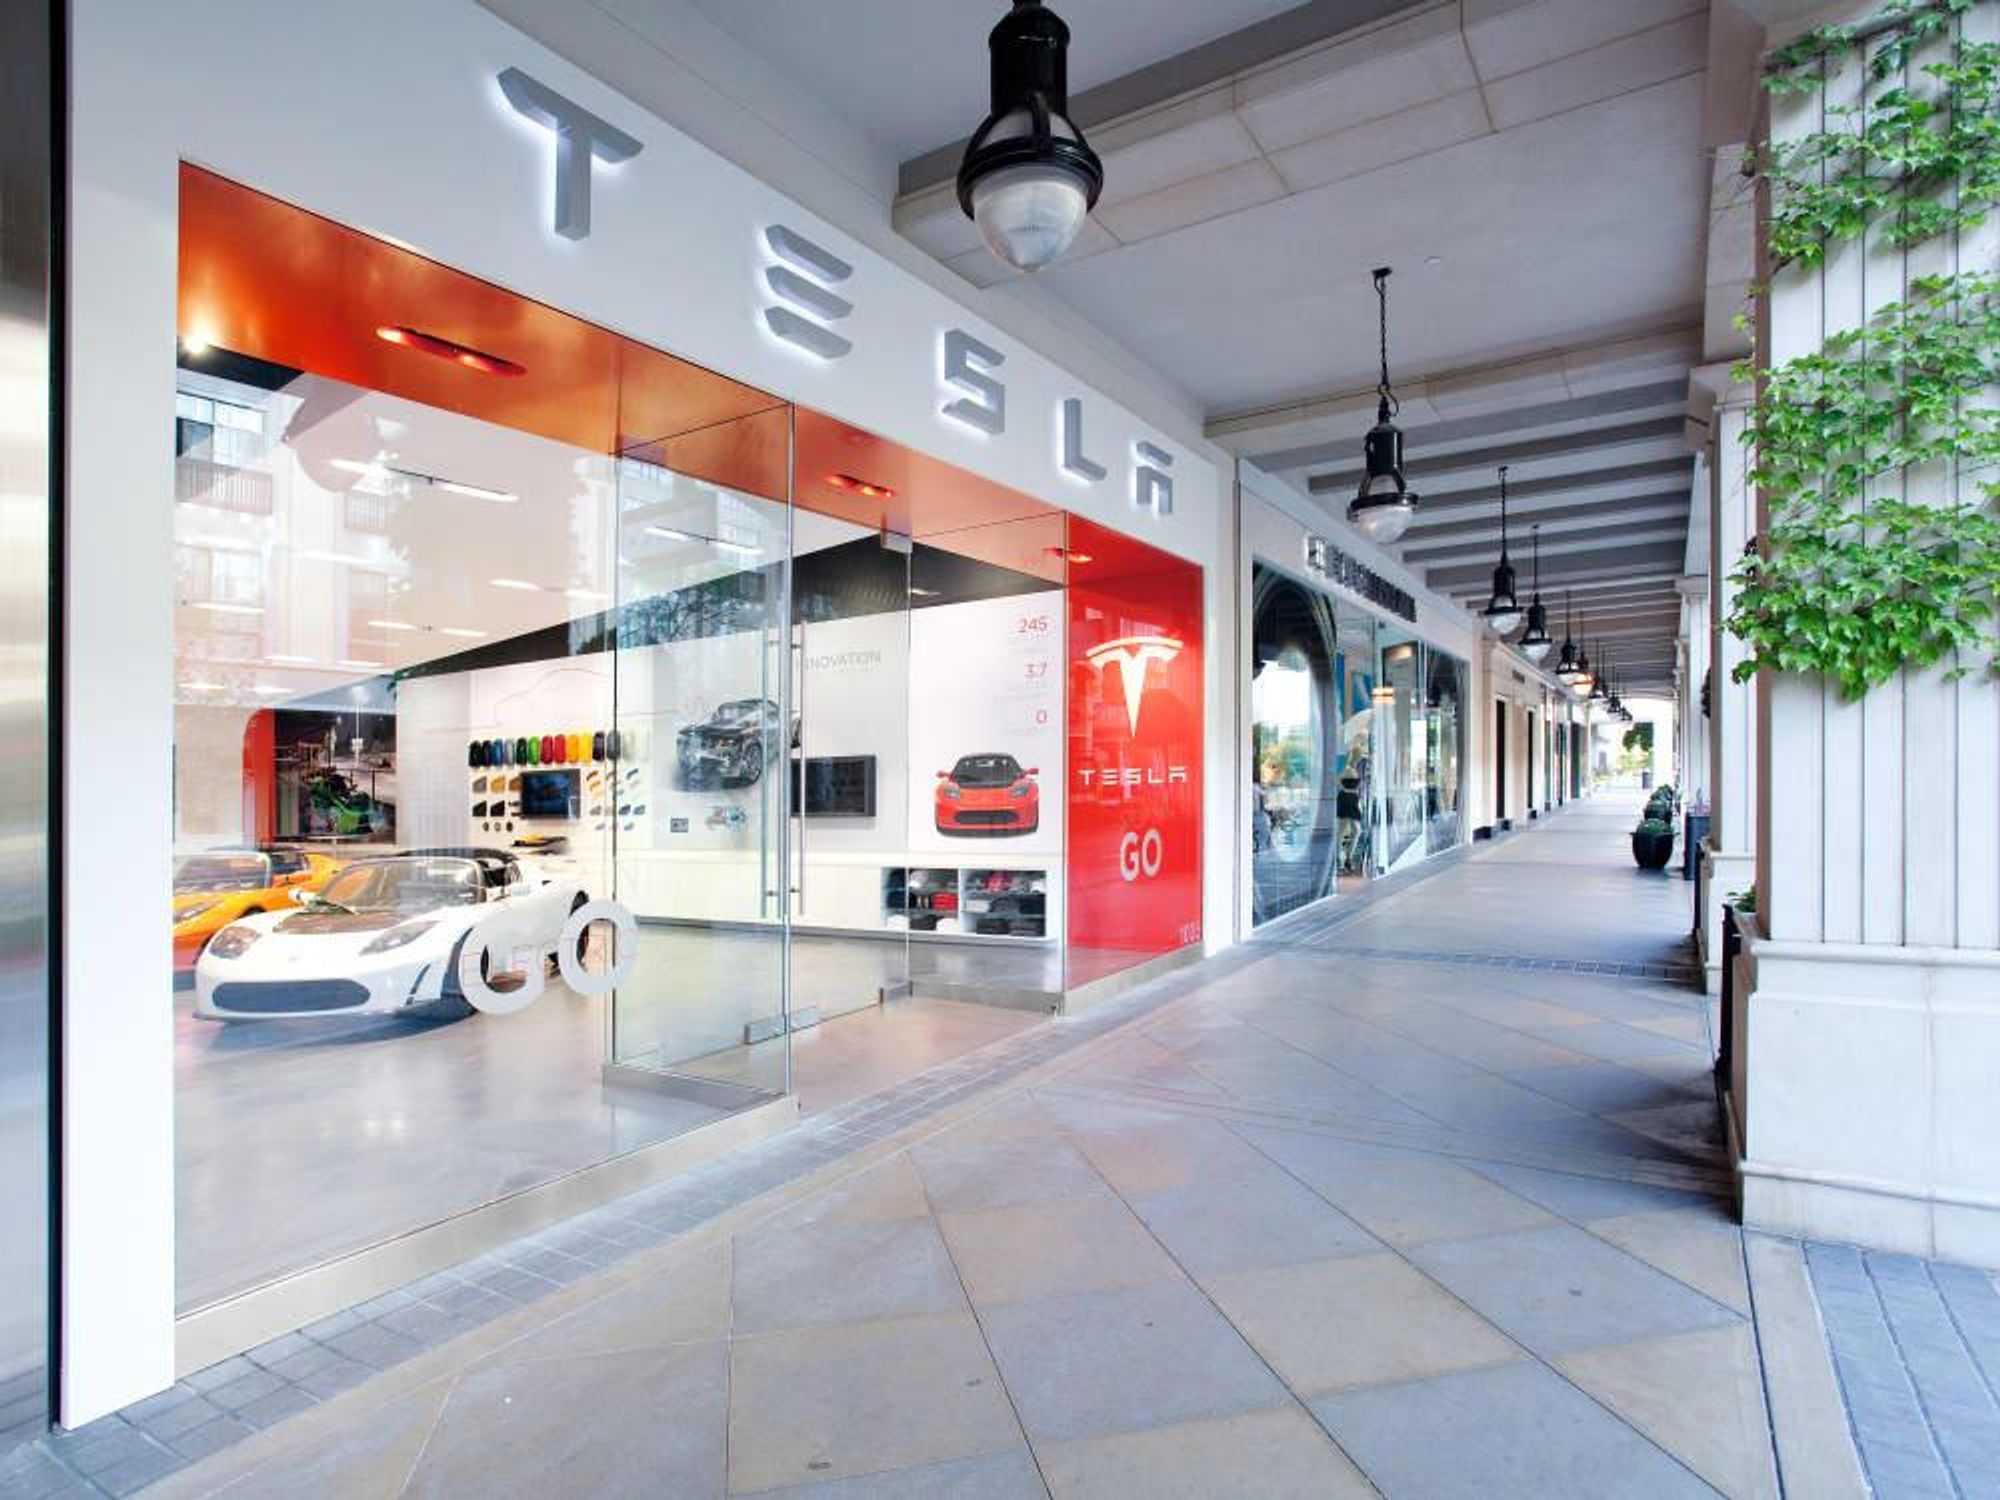 Tesla opening showroom at The Gardens on El Paseo